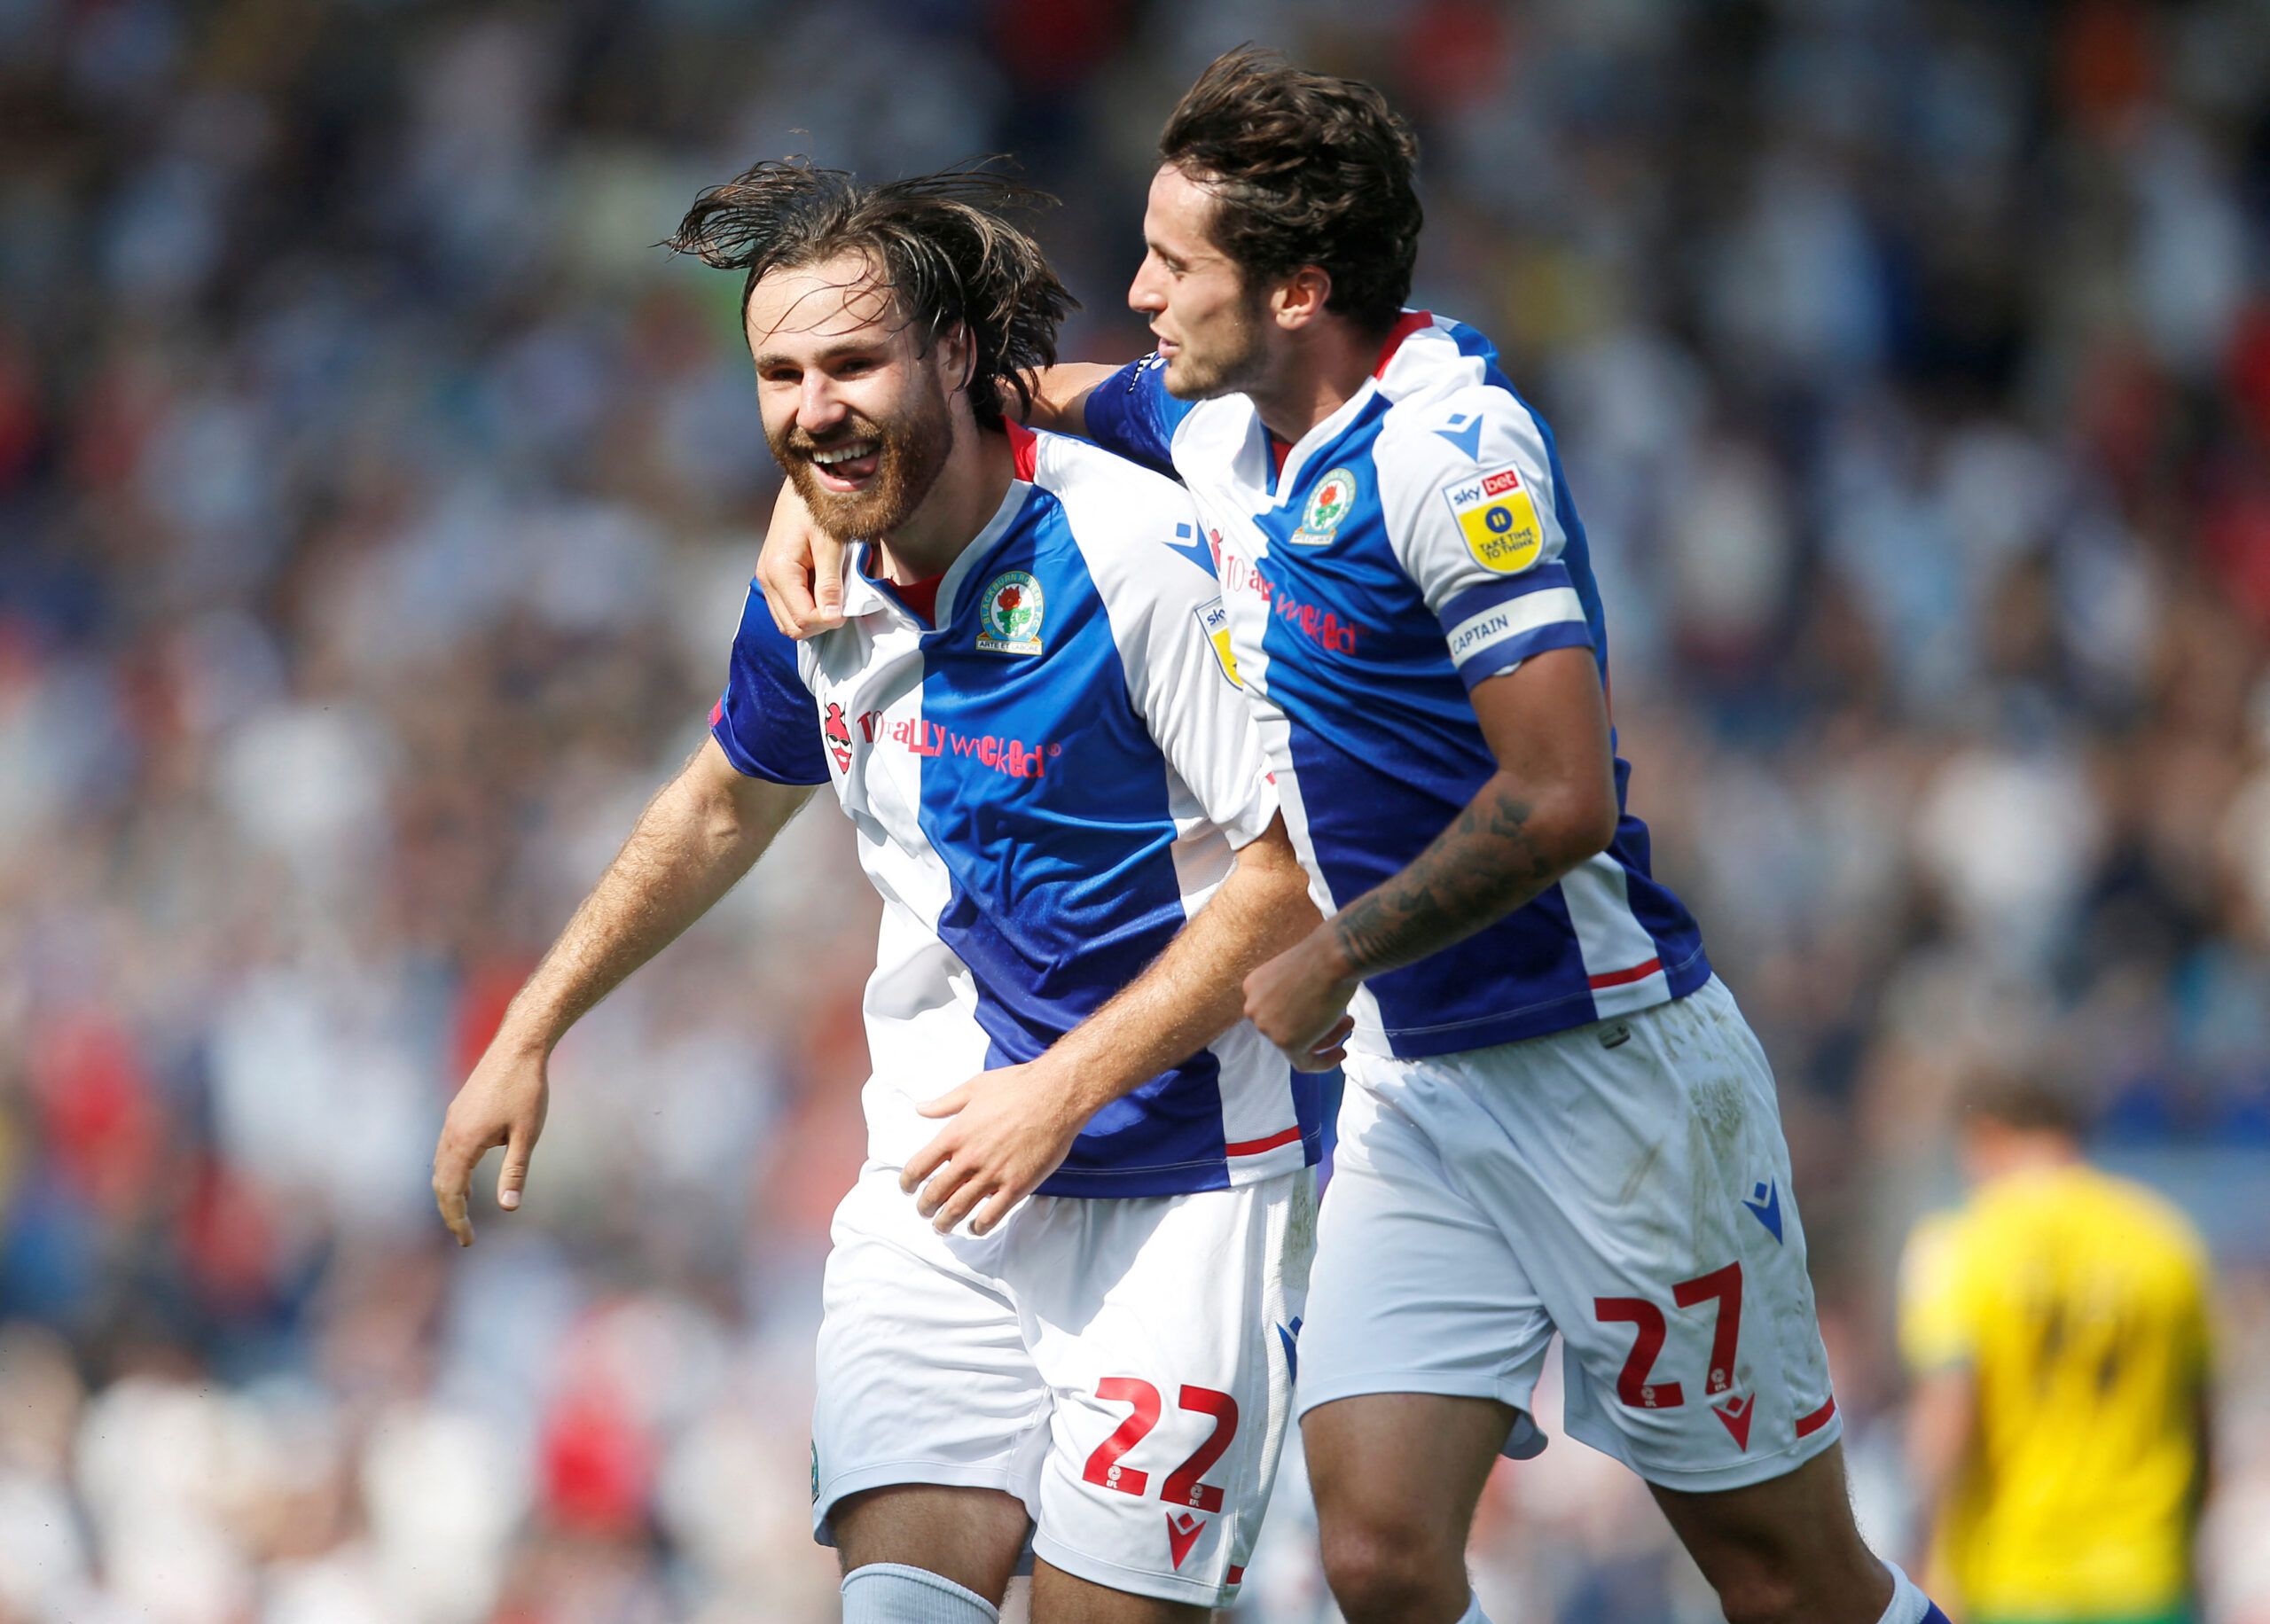 Soccer Football - Championship - Blackburn Rovers v West Bromwich Albion - Ewood Park, Blackburn, Britain - August 14, 2022 Blackburn Rovers' Ben Brereton Diaz celebrates scoring their first goal with Lewis Travis Action Images/Ed Sykes  EDITORIAL USE ONLY. No use with unauthorized audio, video, data, fixture lists, club/league logos or 